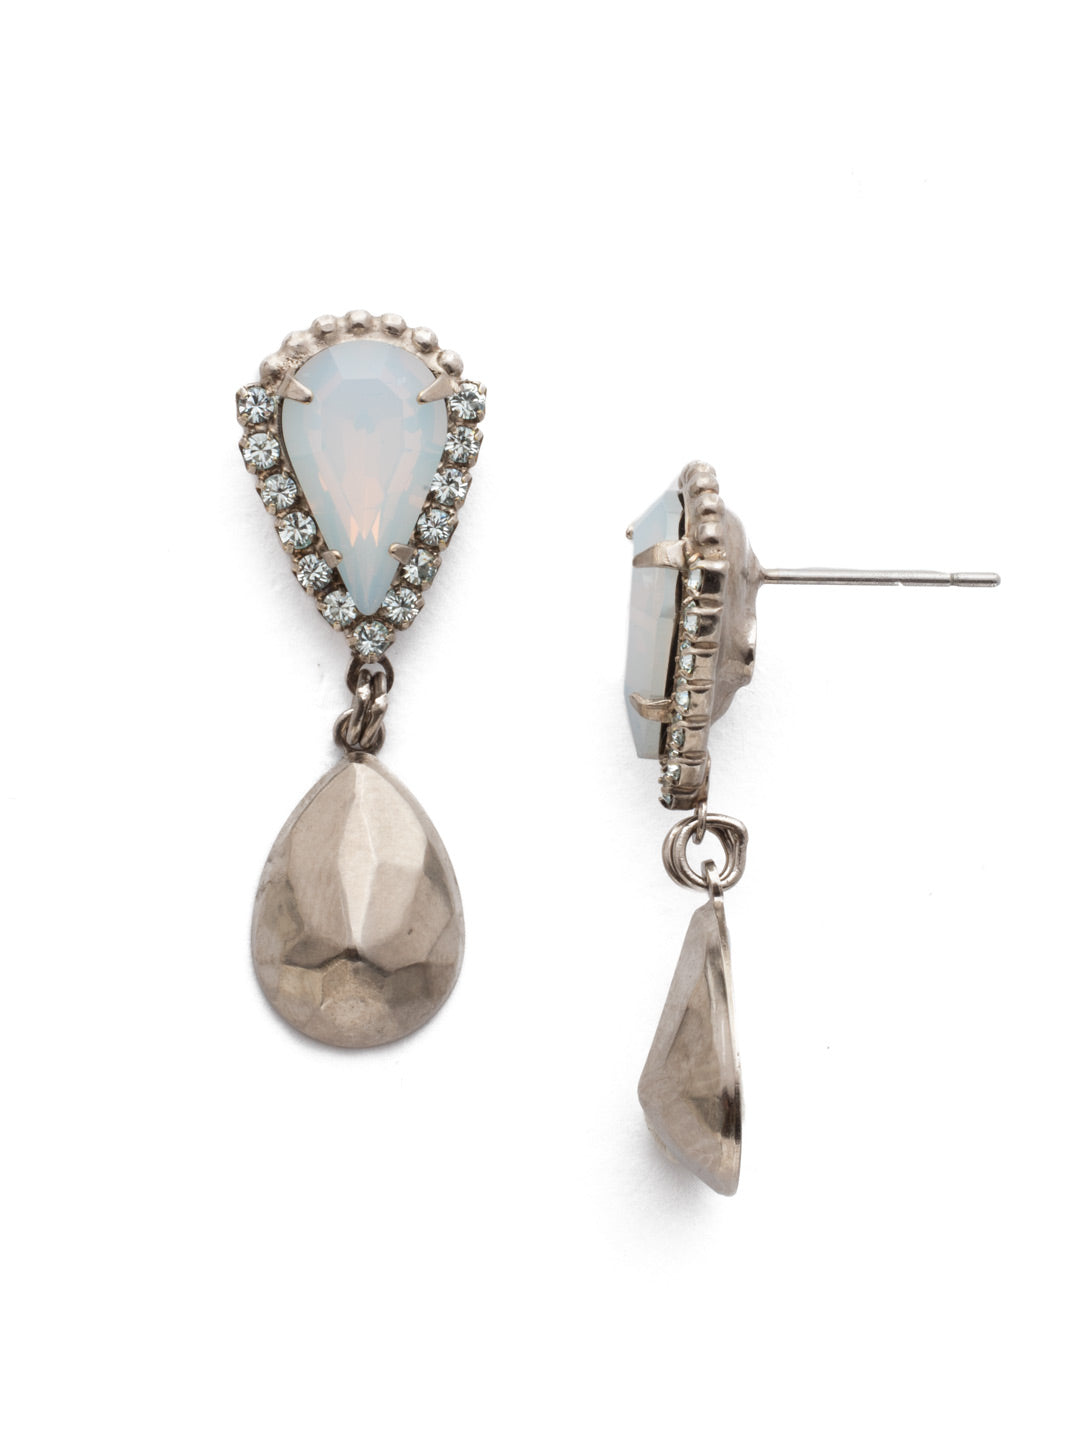 Lysa Drop Earring - EEF2ASGLC - A simple teardrop cut shape dangles from these statement earrings showcasing another teardrop crystal set atop a backdrop of tiny crystals. You don't need any other accessories when you're wearing these earrings. From Sorrelli's Glacier collection in our Antique Silver-tone finish.